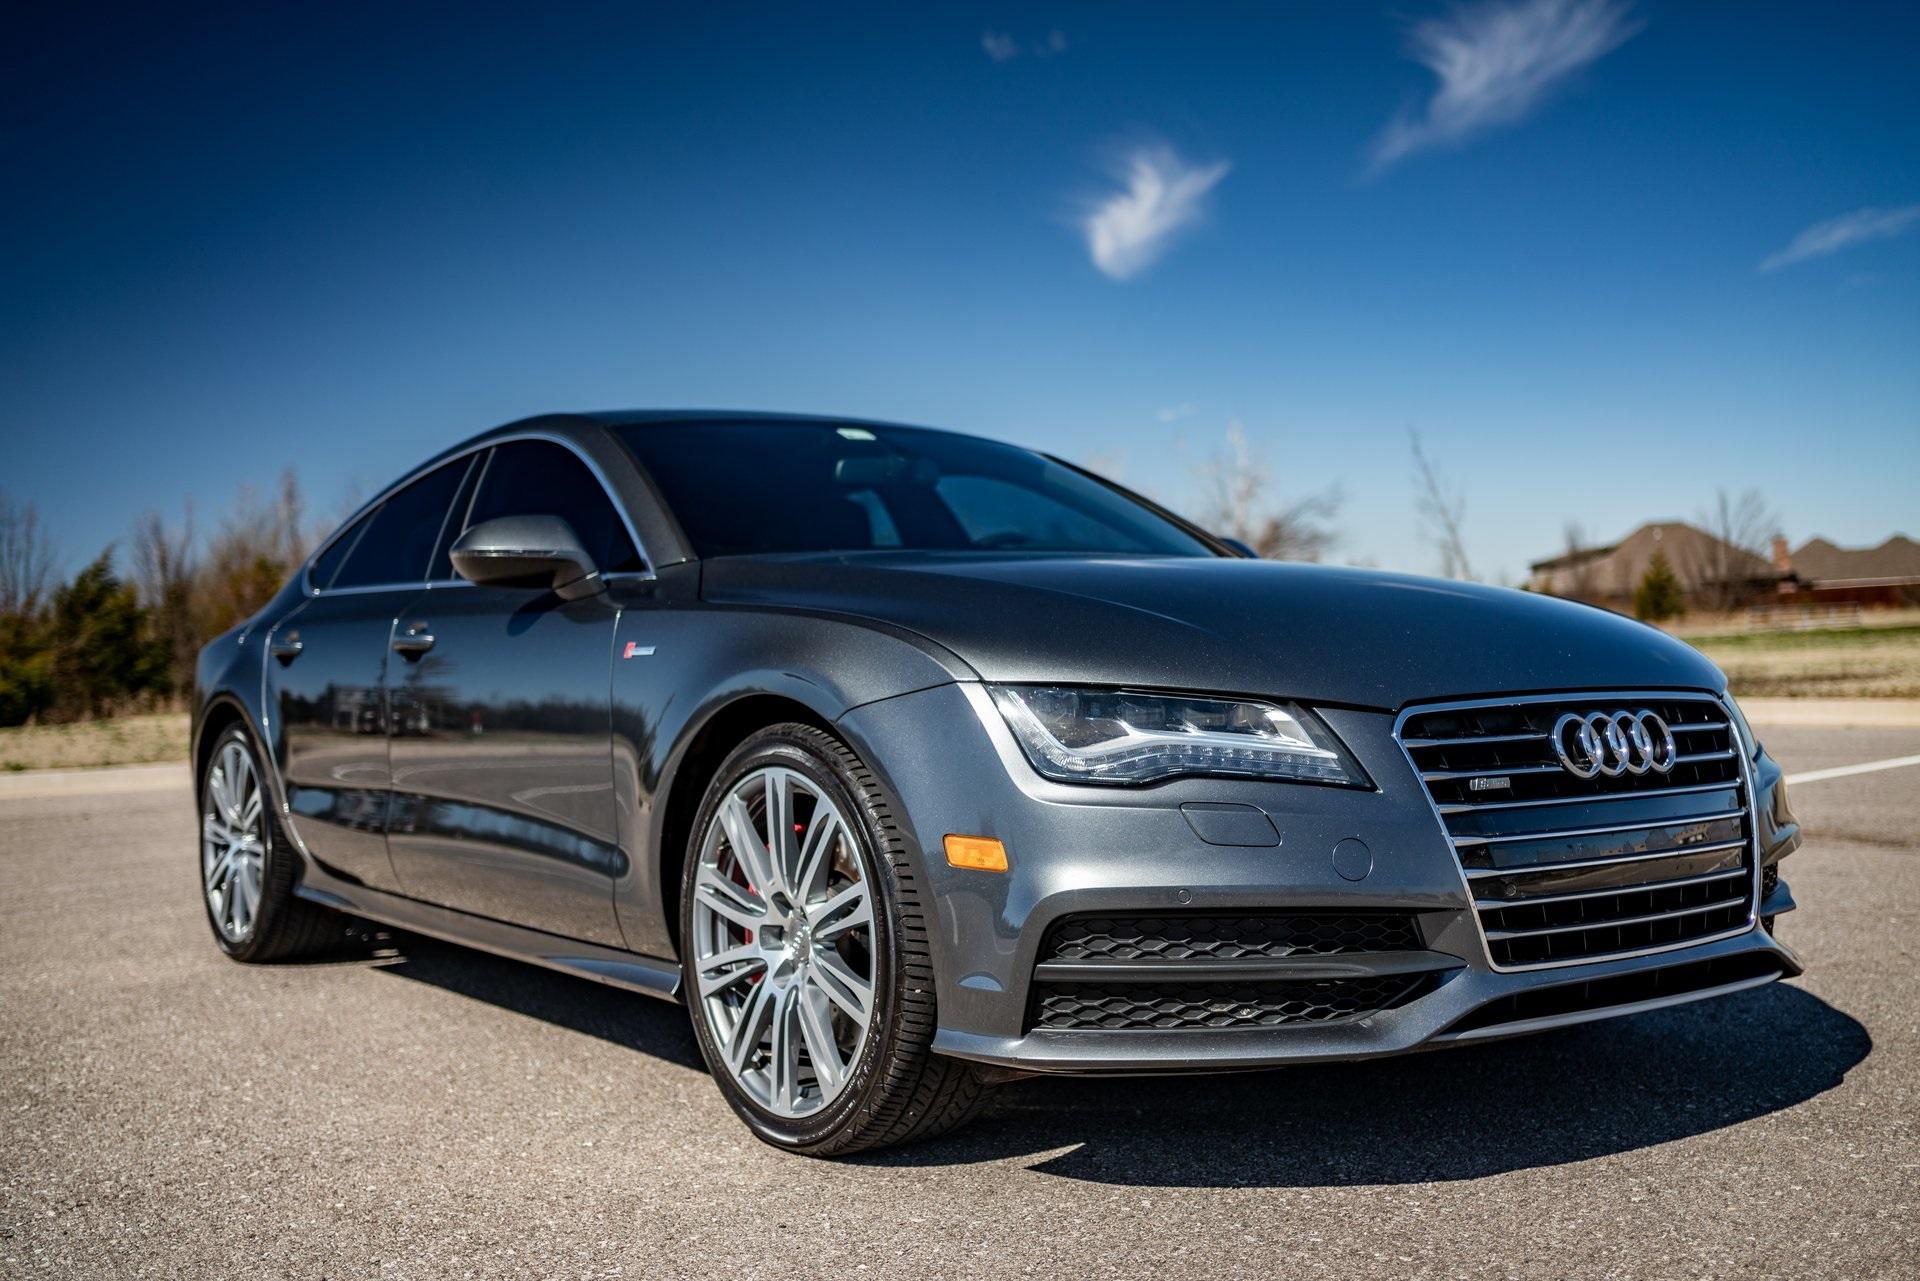 2014 Audi A7 Prices, Reviews, and Photos - MotorTrend